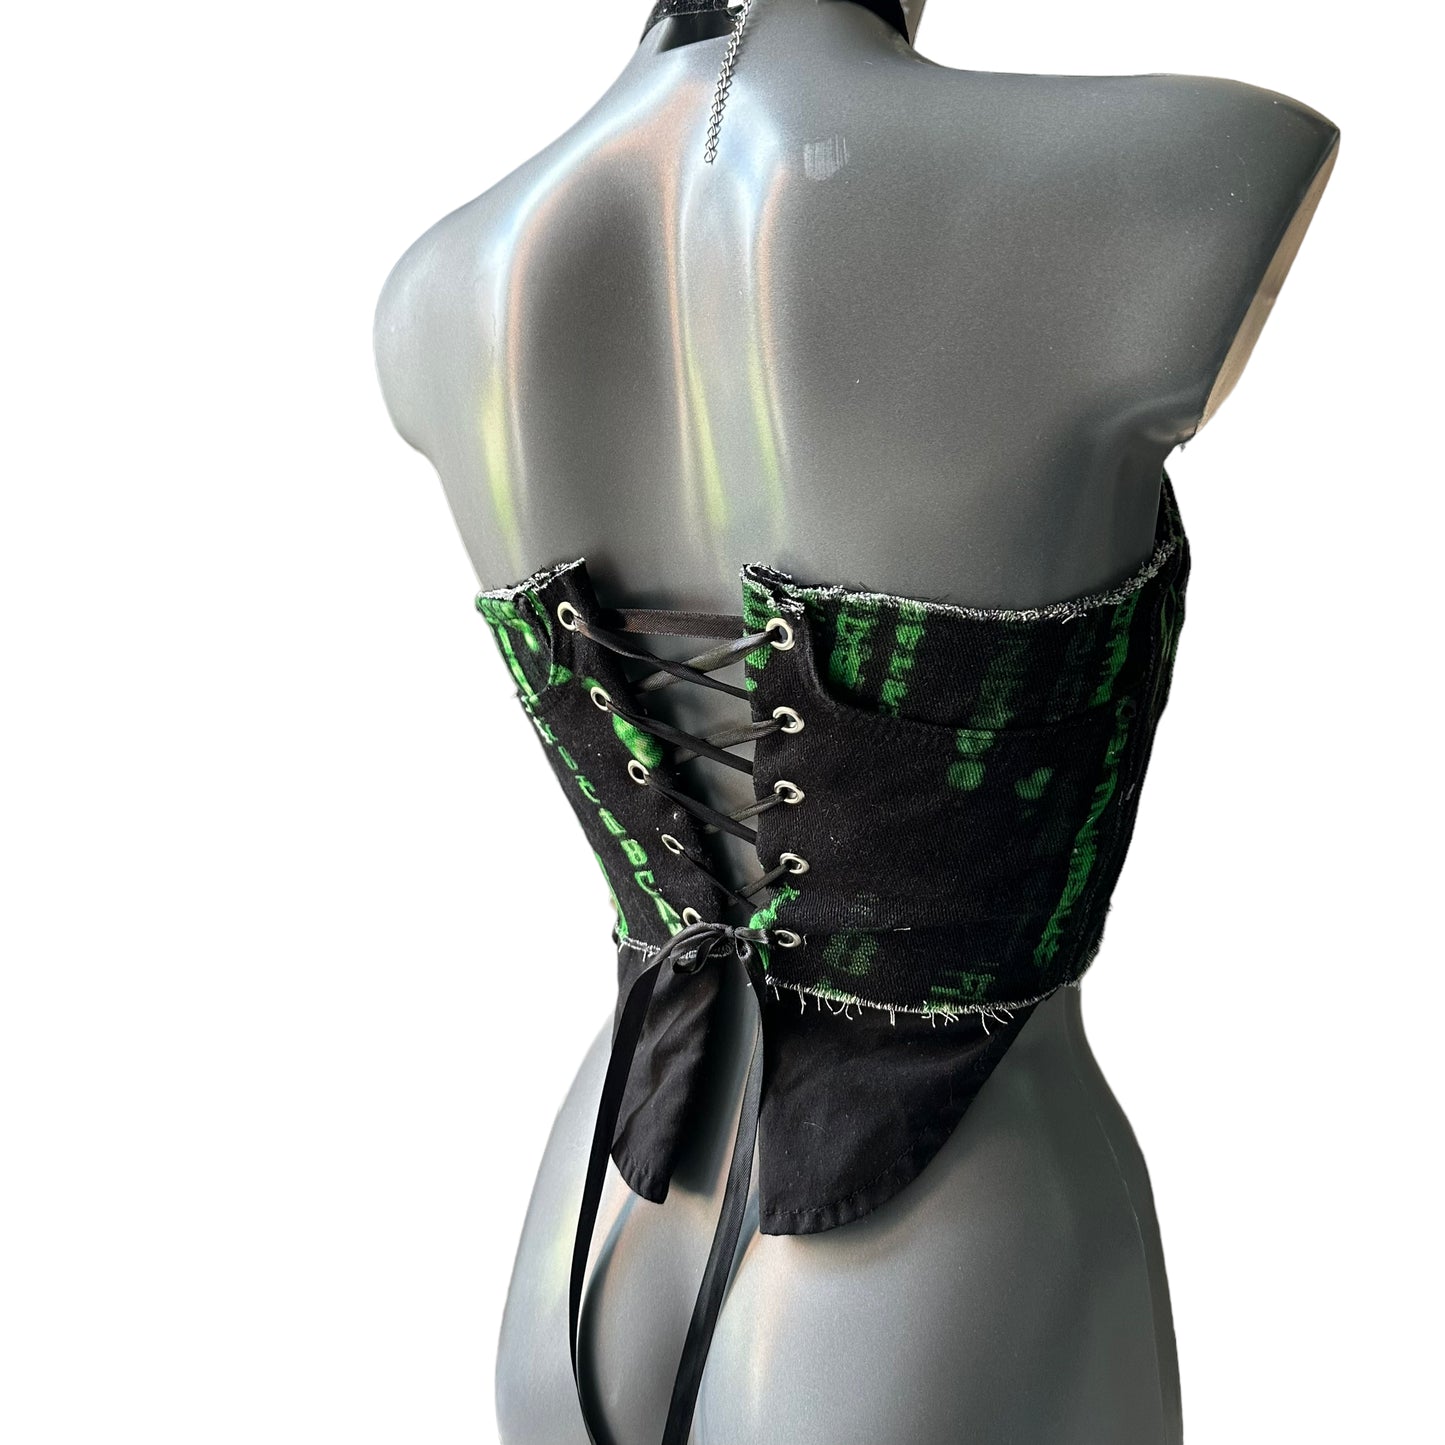 Marilyn Manson Patch Neon Green and Black Handmade Corset Top 6 8 10